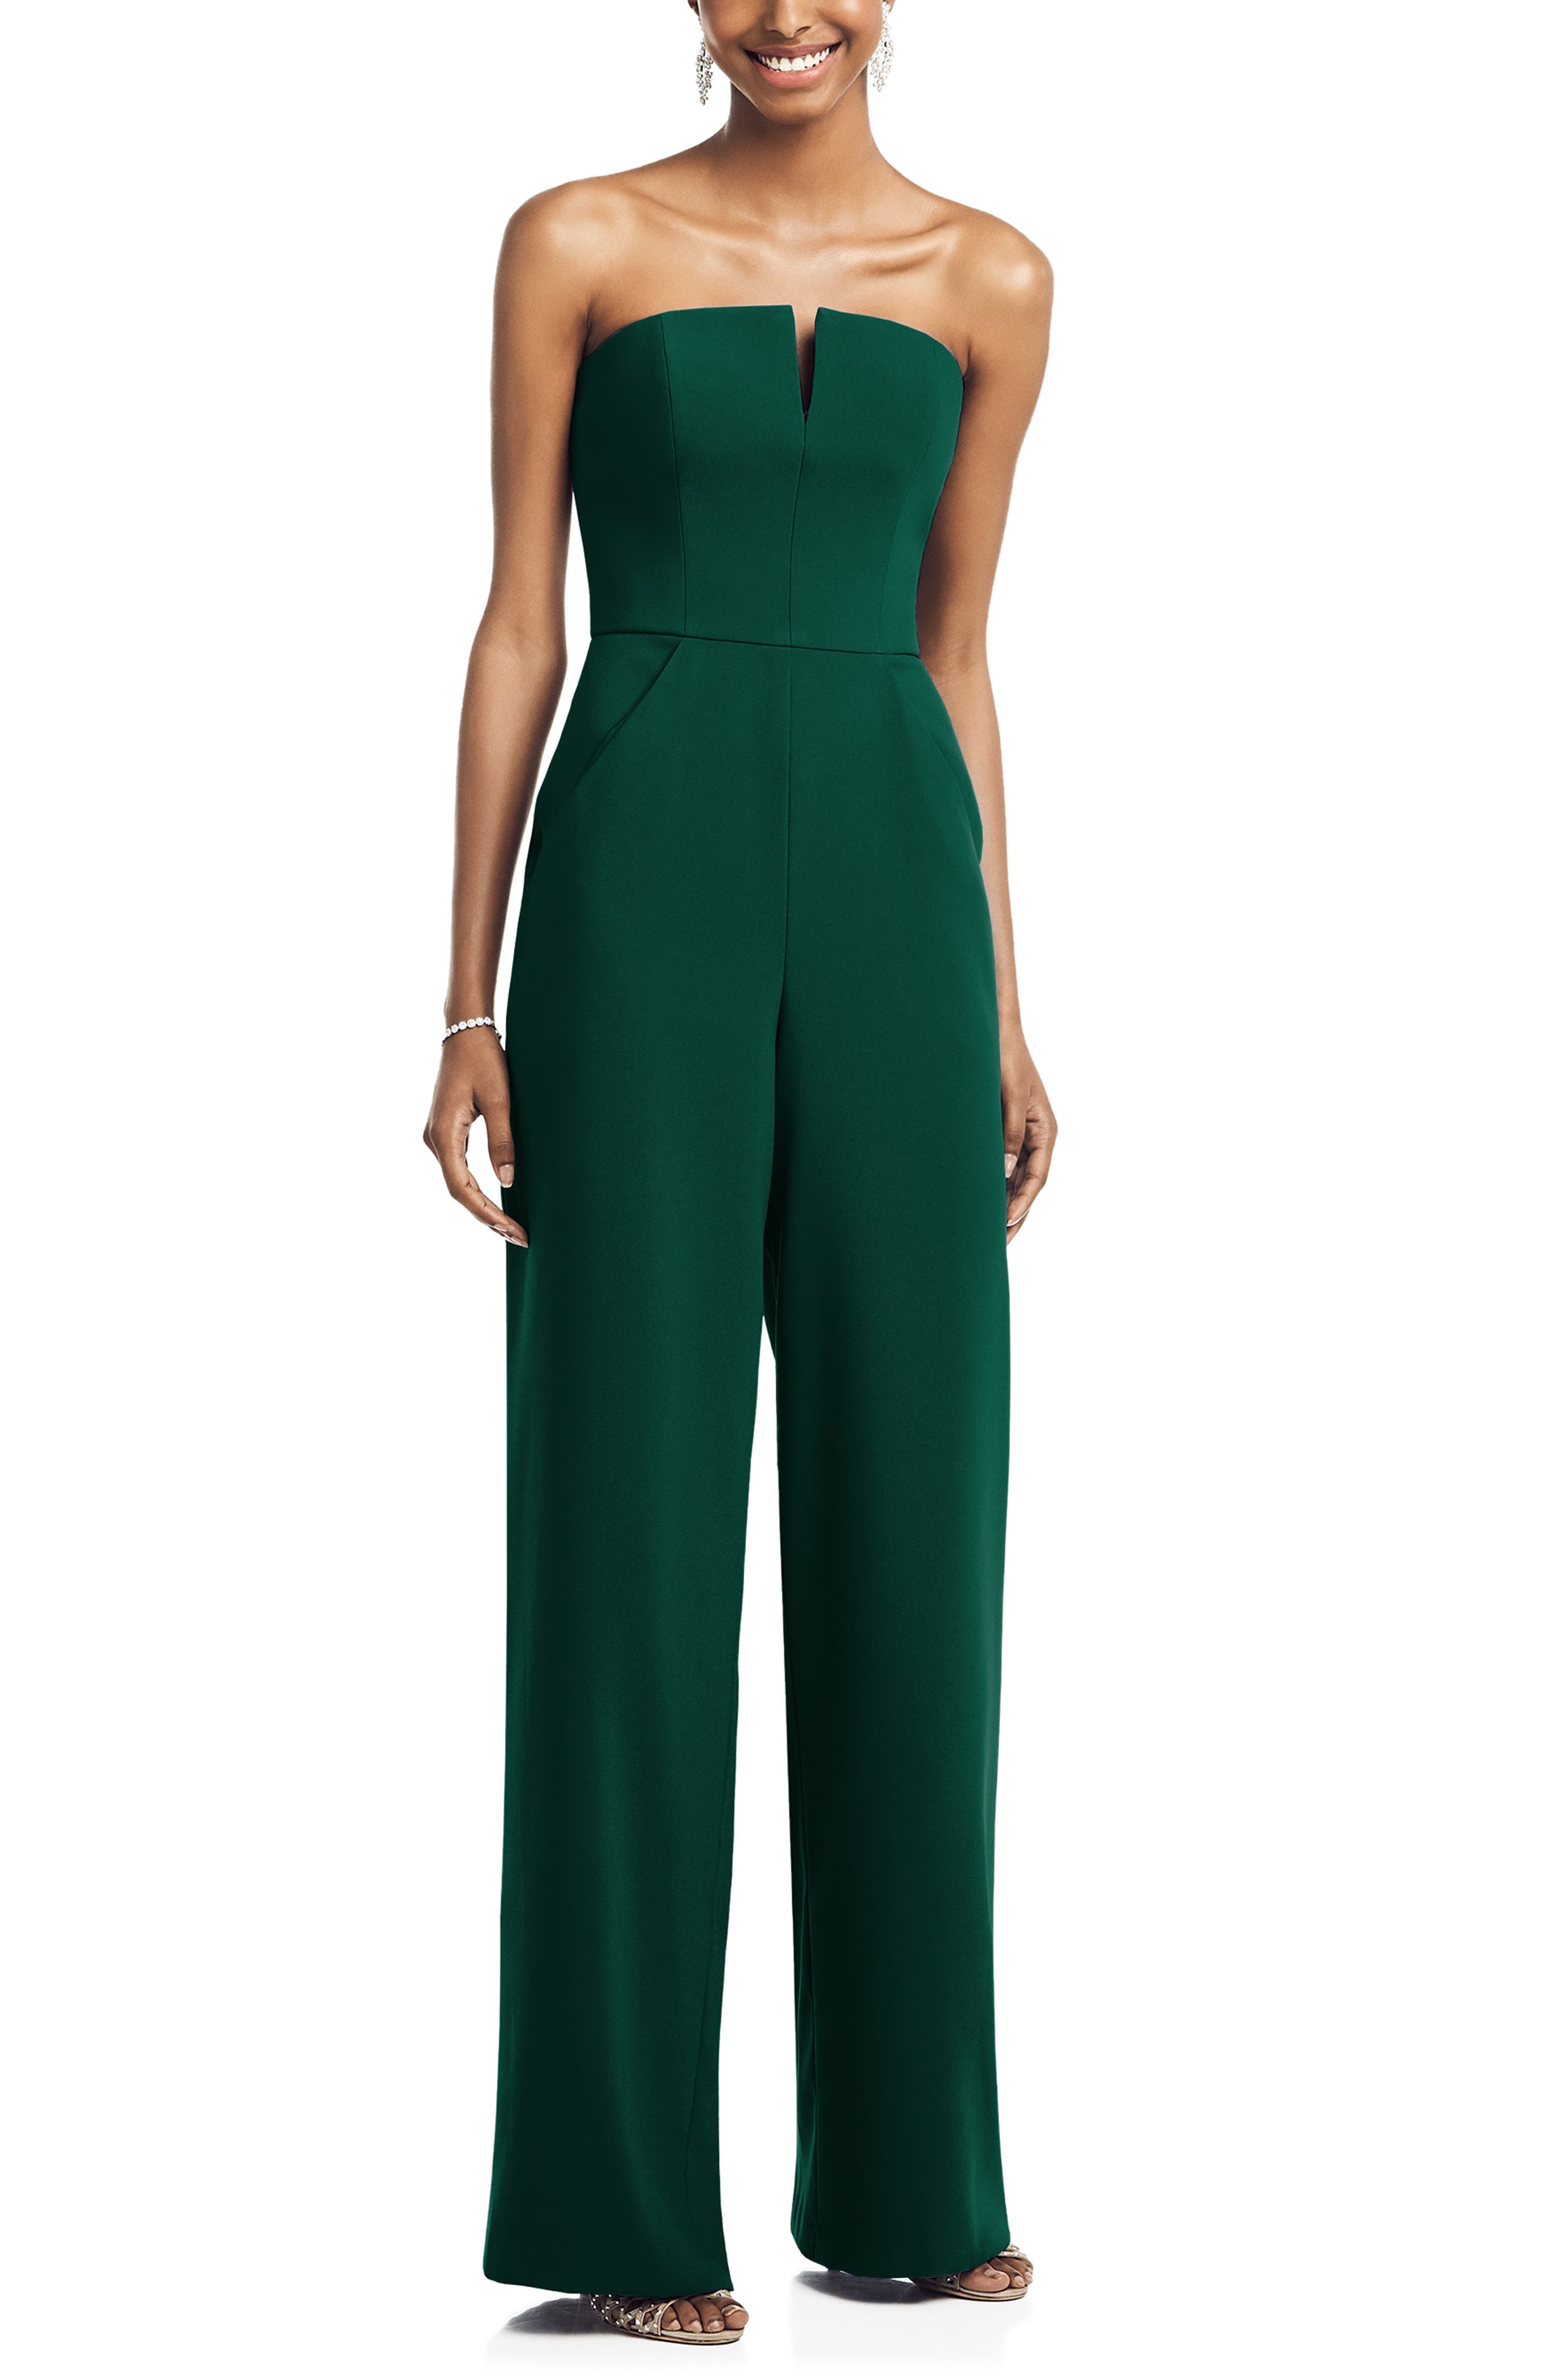 Green Jumpsuits ☀ Rompers for Women ...